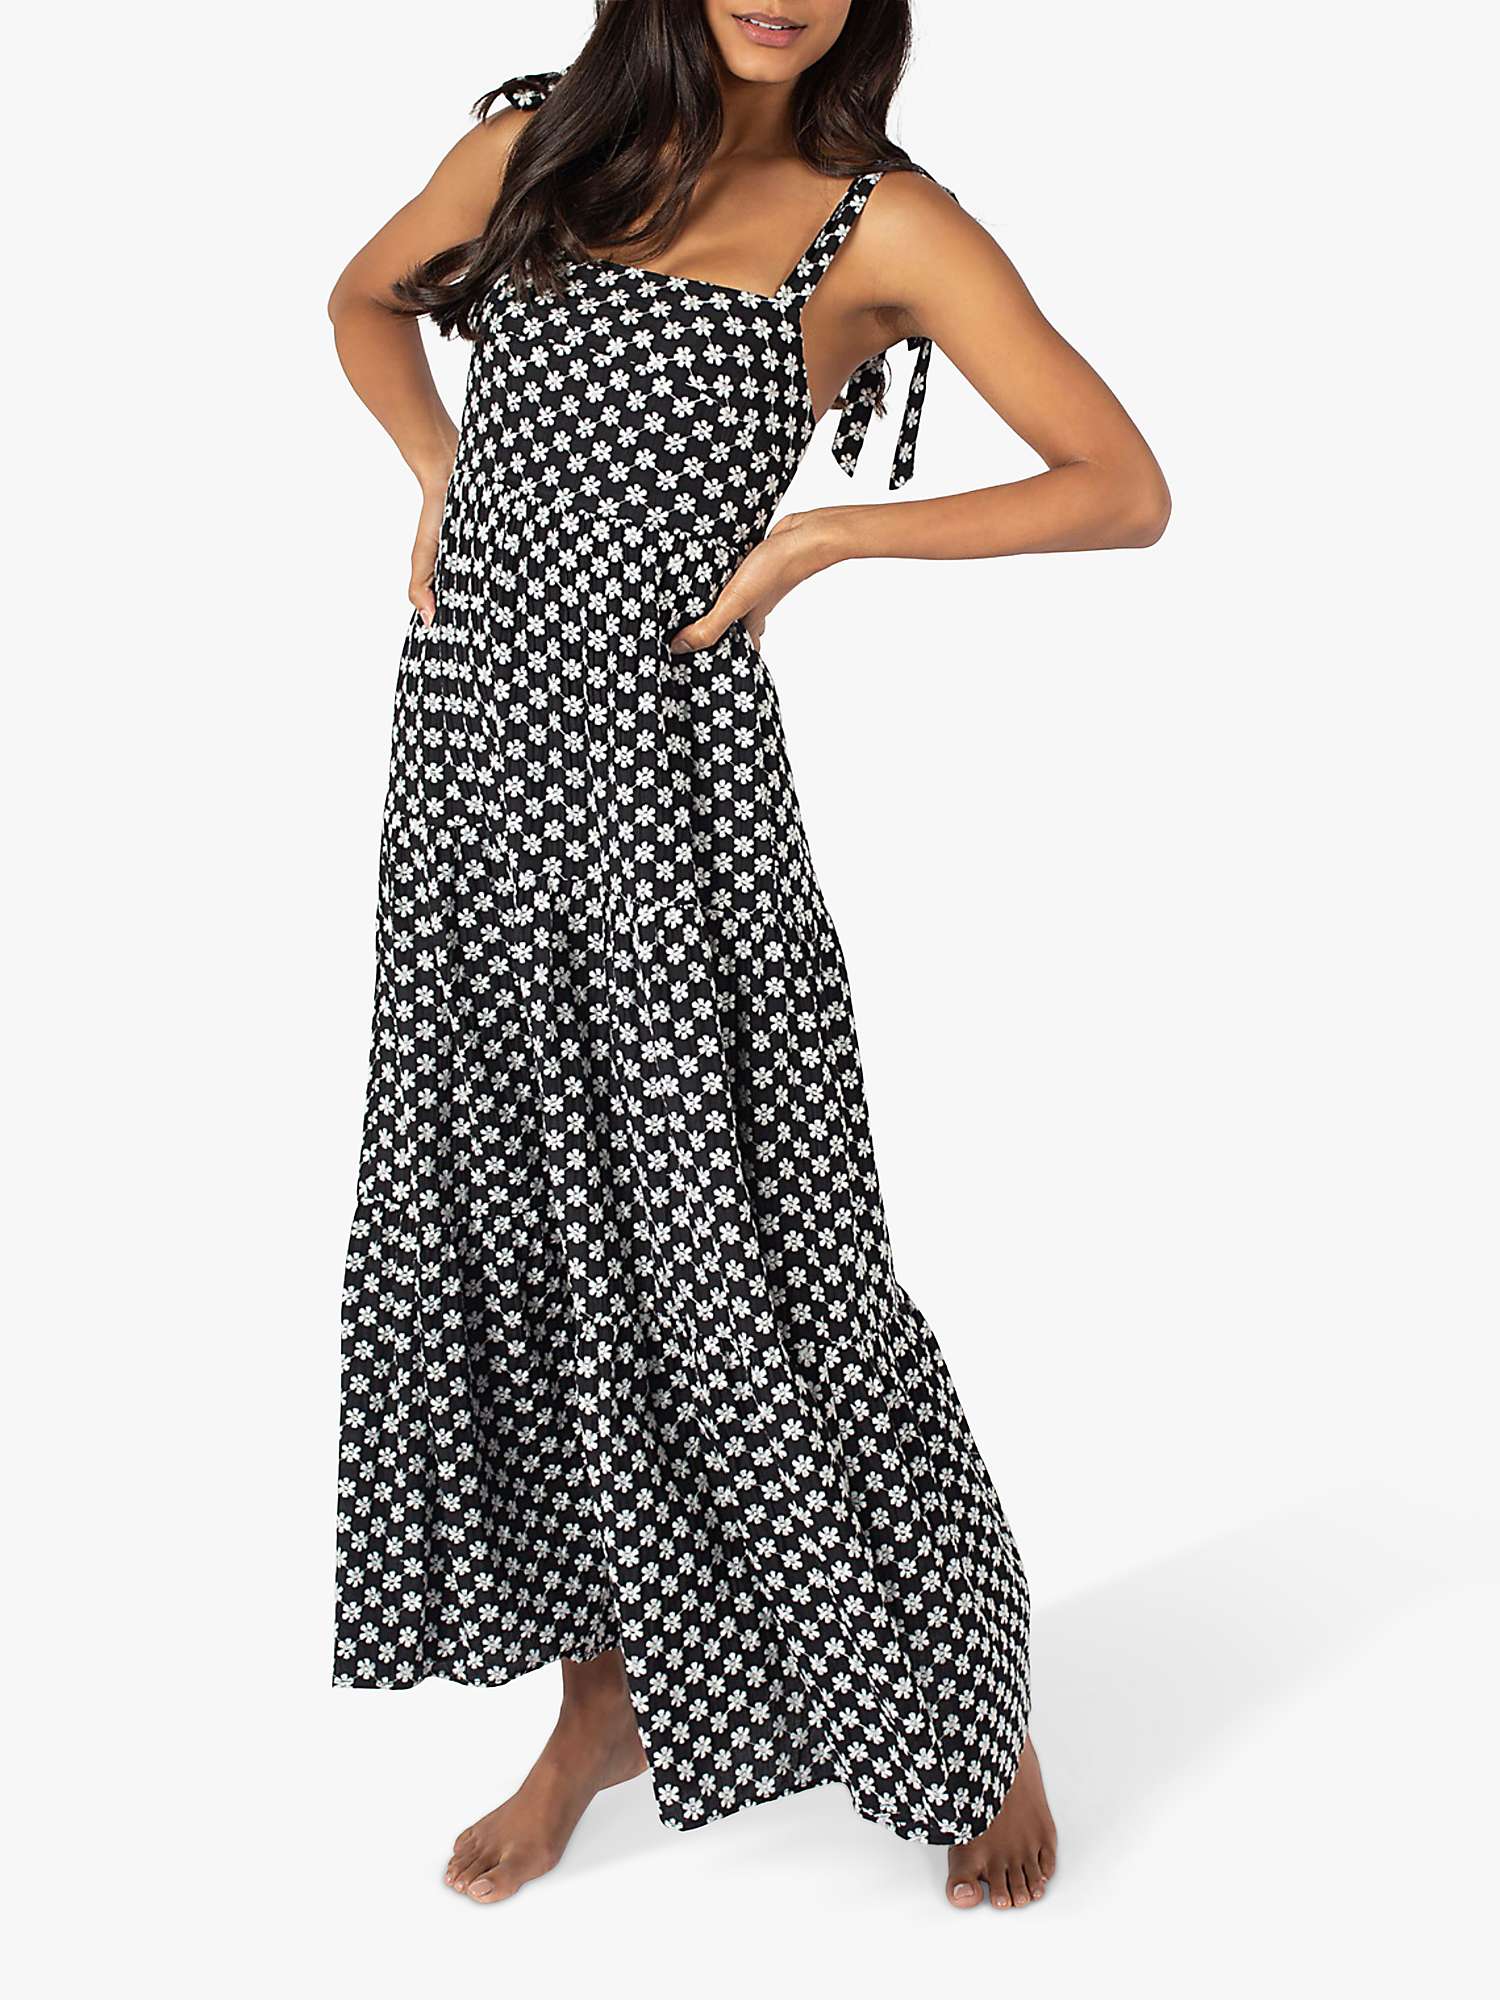 Buy Traffic People The Chorus Lily Cotton Dress, Black Online at johnlewis.com